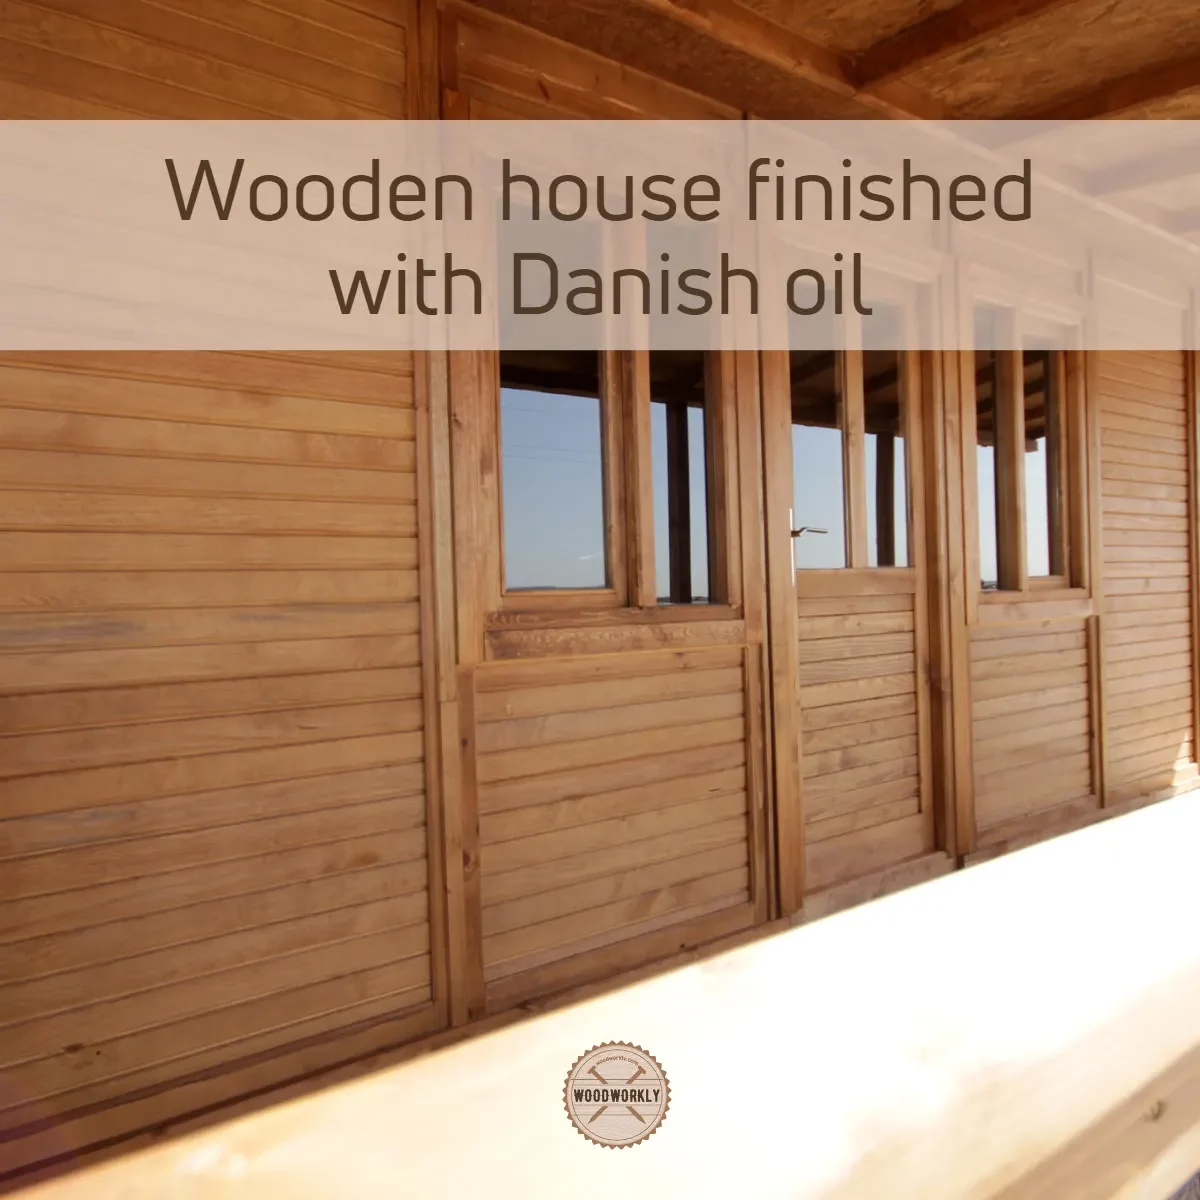 Wooden house finished with Danish oil